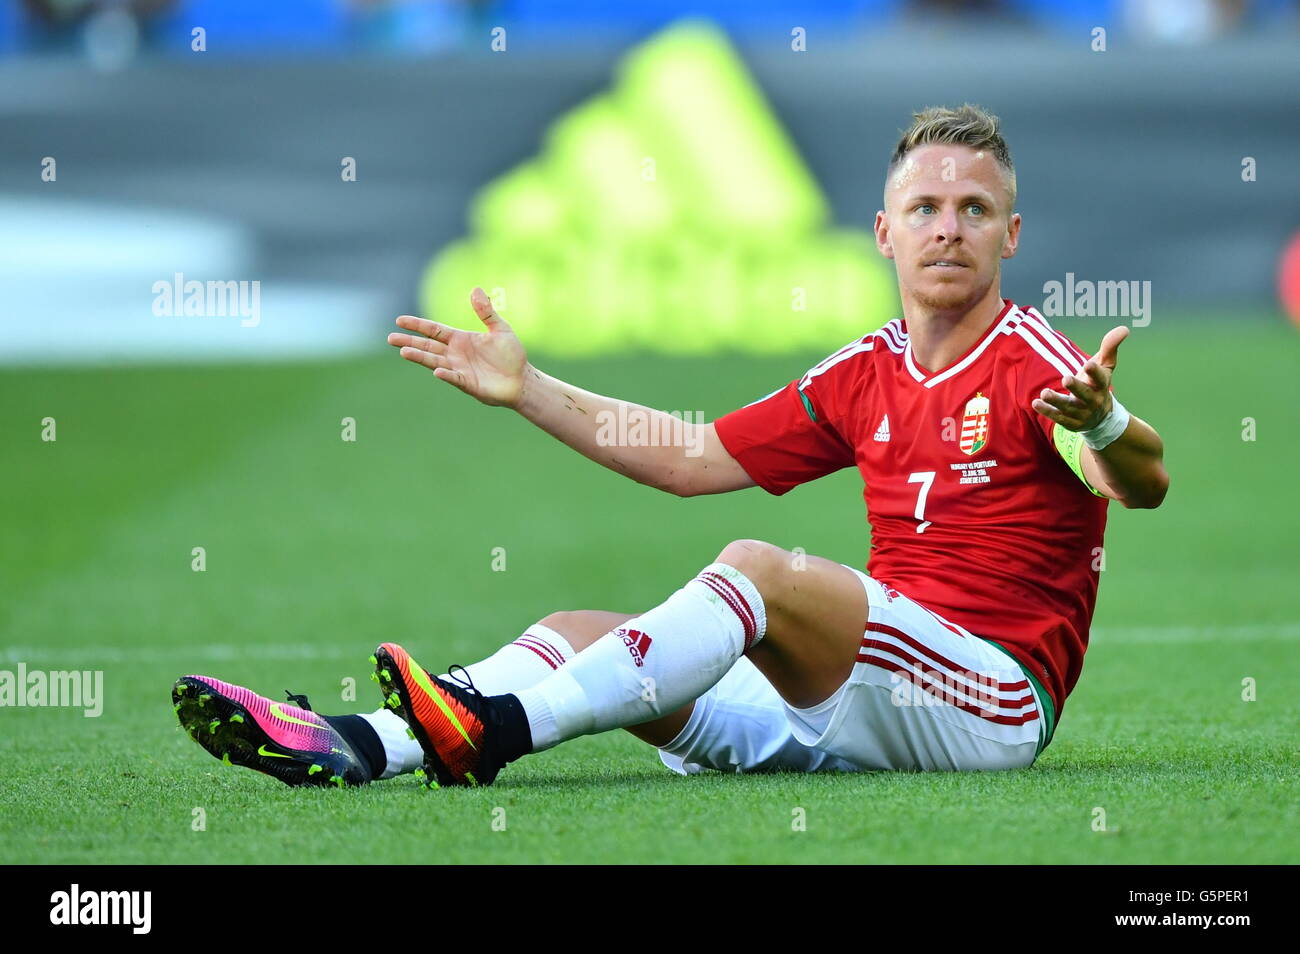 Lyon, France. 22nd June, 2016. Hungary's Balazs Dzsudzsak reacts during the UEFA Euro 2016 Group F soccer match between Hungary and Portugal at the Stade de Lyon in Lyon, France, 22 June 2016. Photo: Uwe Anspach/dpa/Alamy Live News Stock Photo